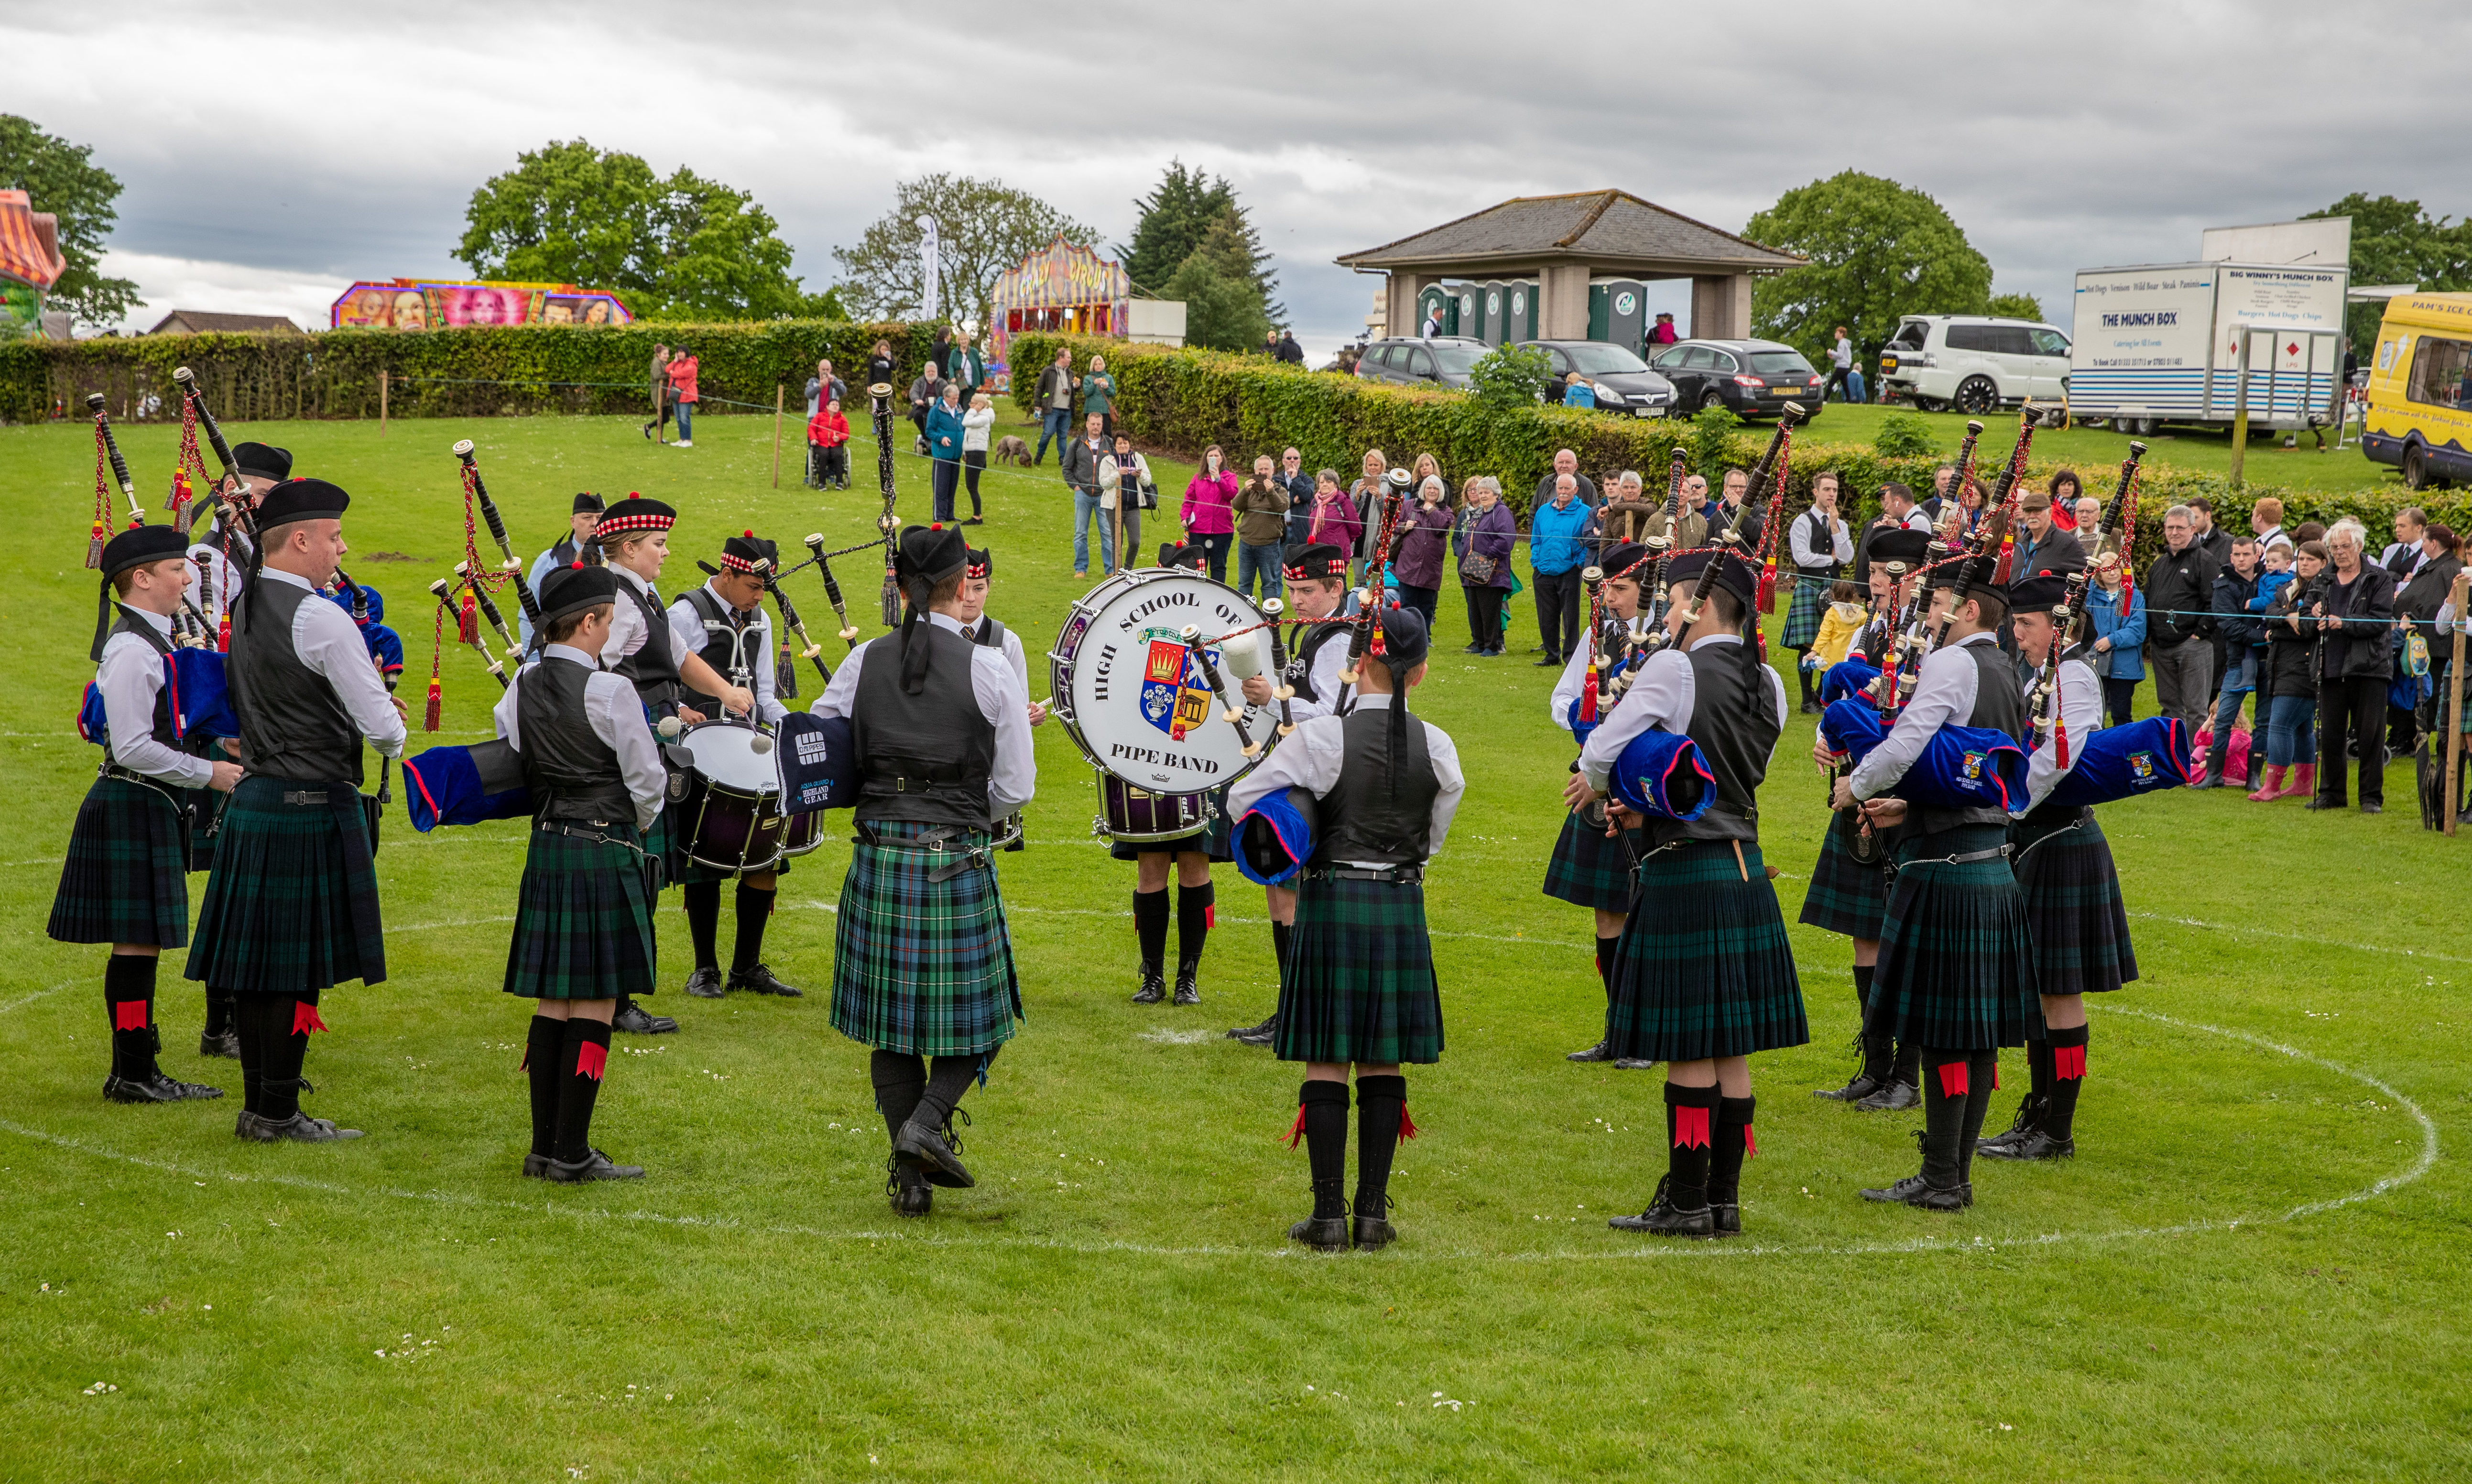 Dundee High School perform in the arena during the Markinch Highland Games.